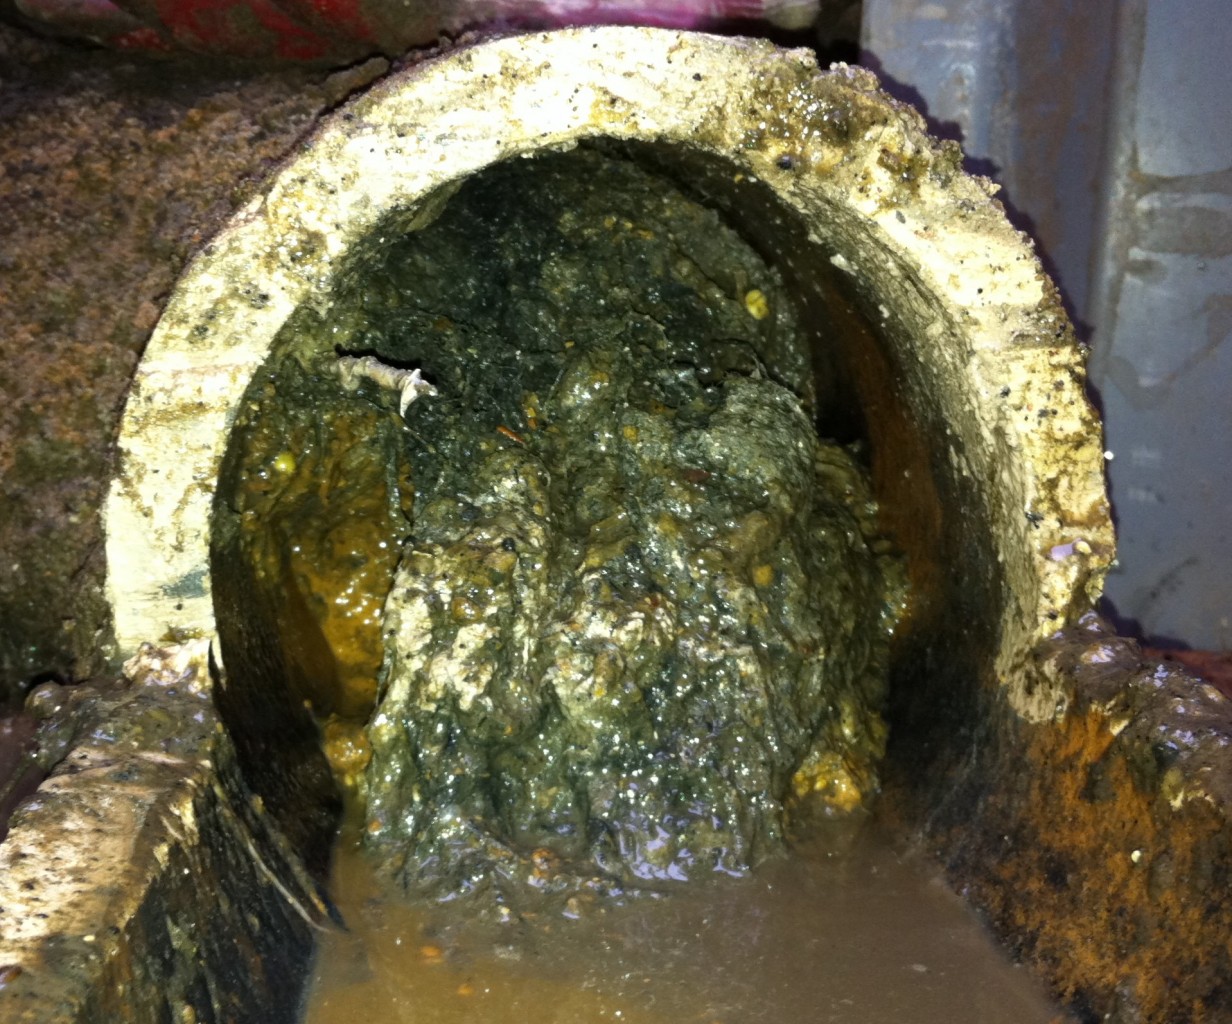 Blocked Drains? Tips to keep them flowing: - ProTech Property Solutions